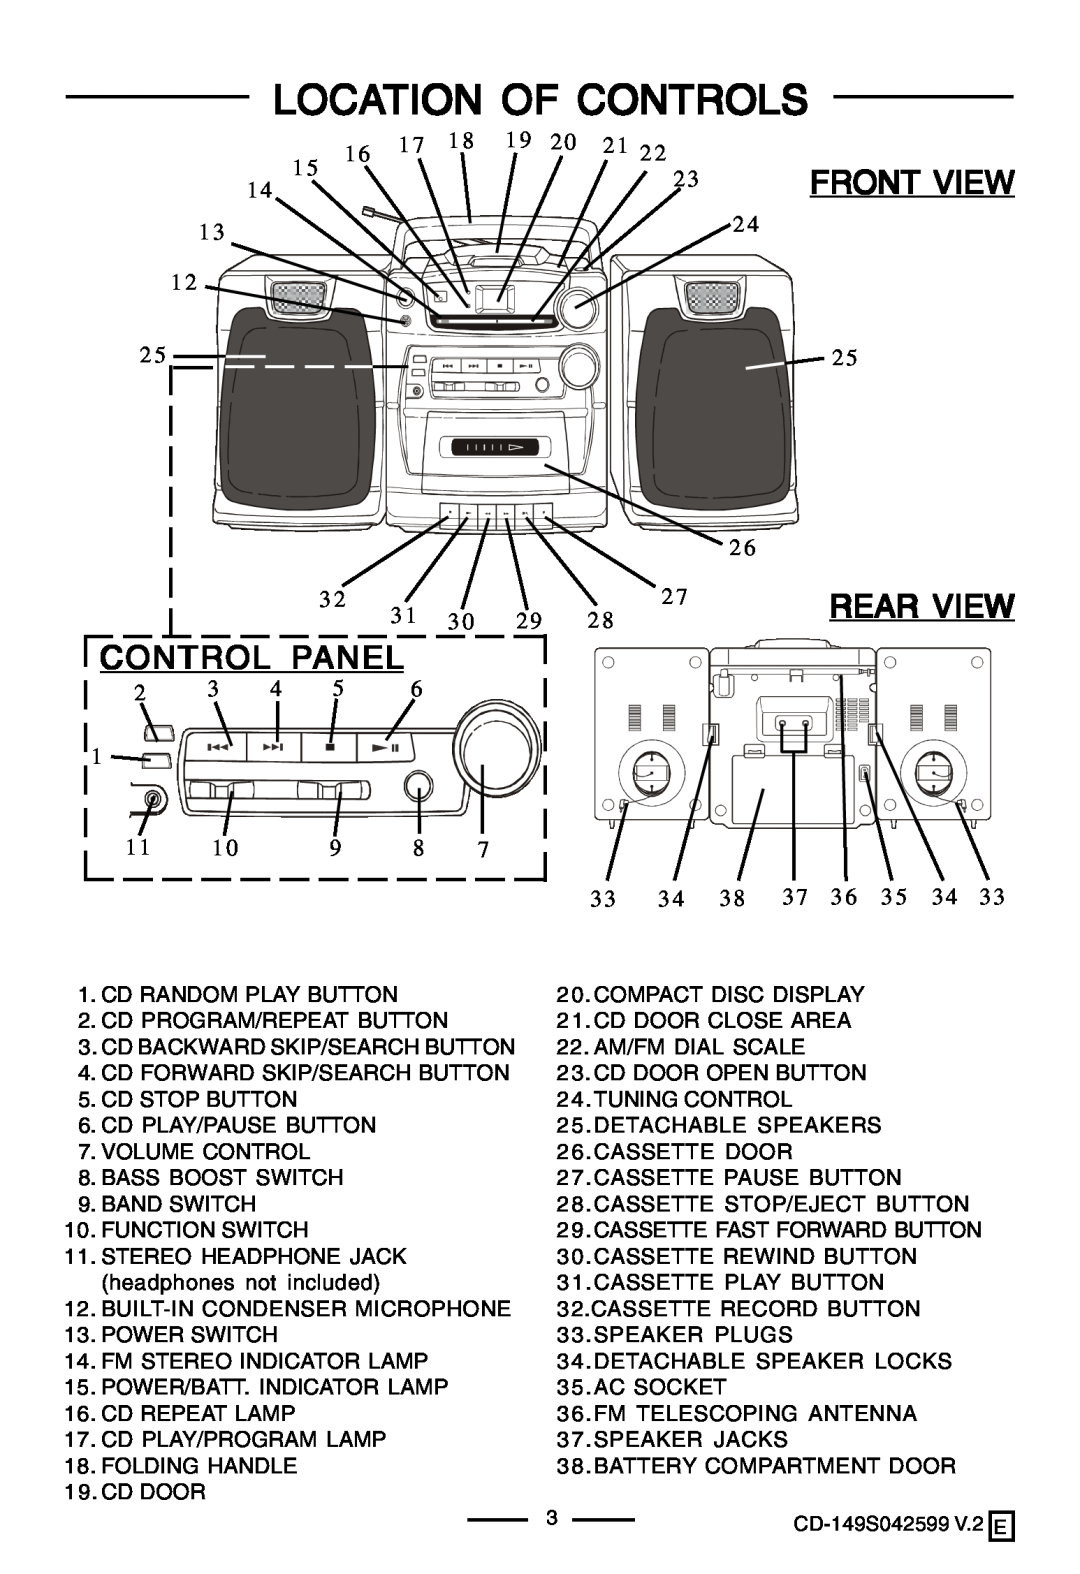 Lenoxx Electronics CD-149 operating instructions Location Of Controls, Front View, Rear View, Control Panel 